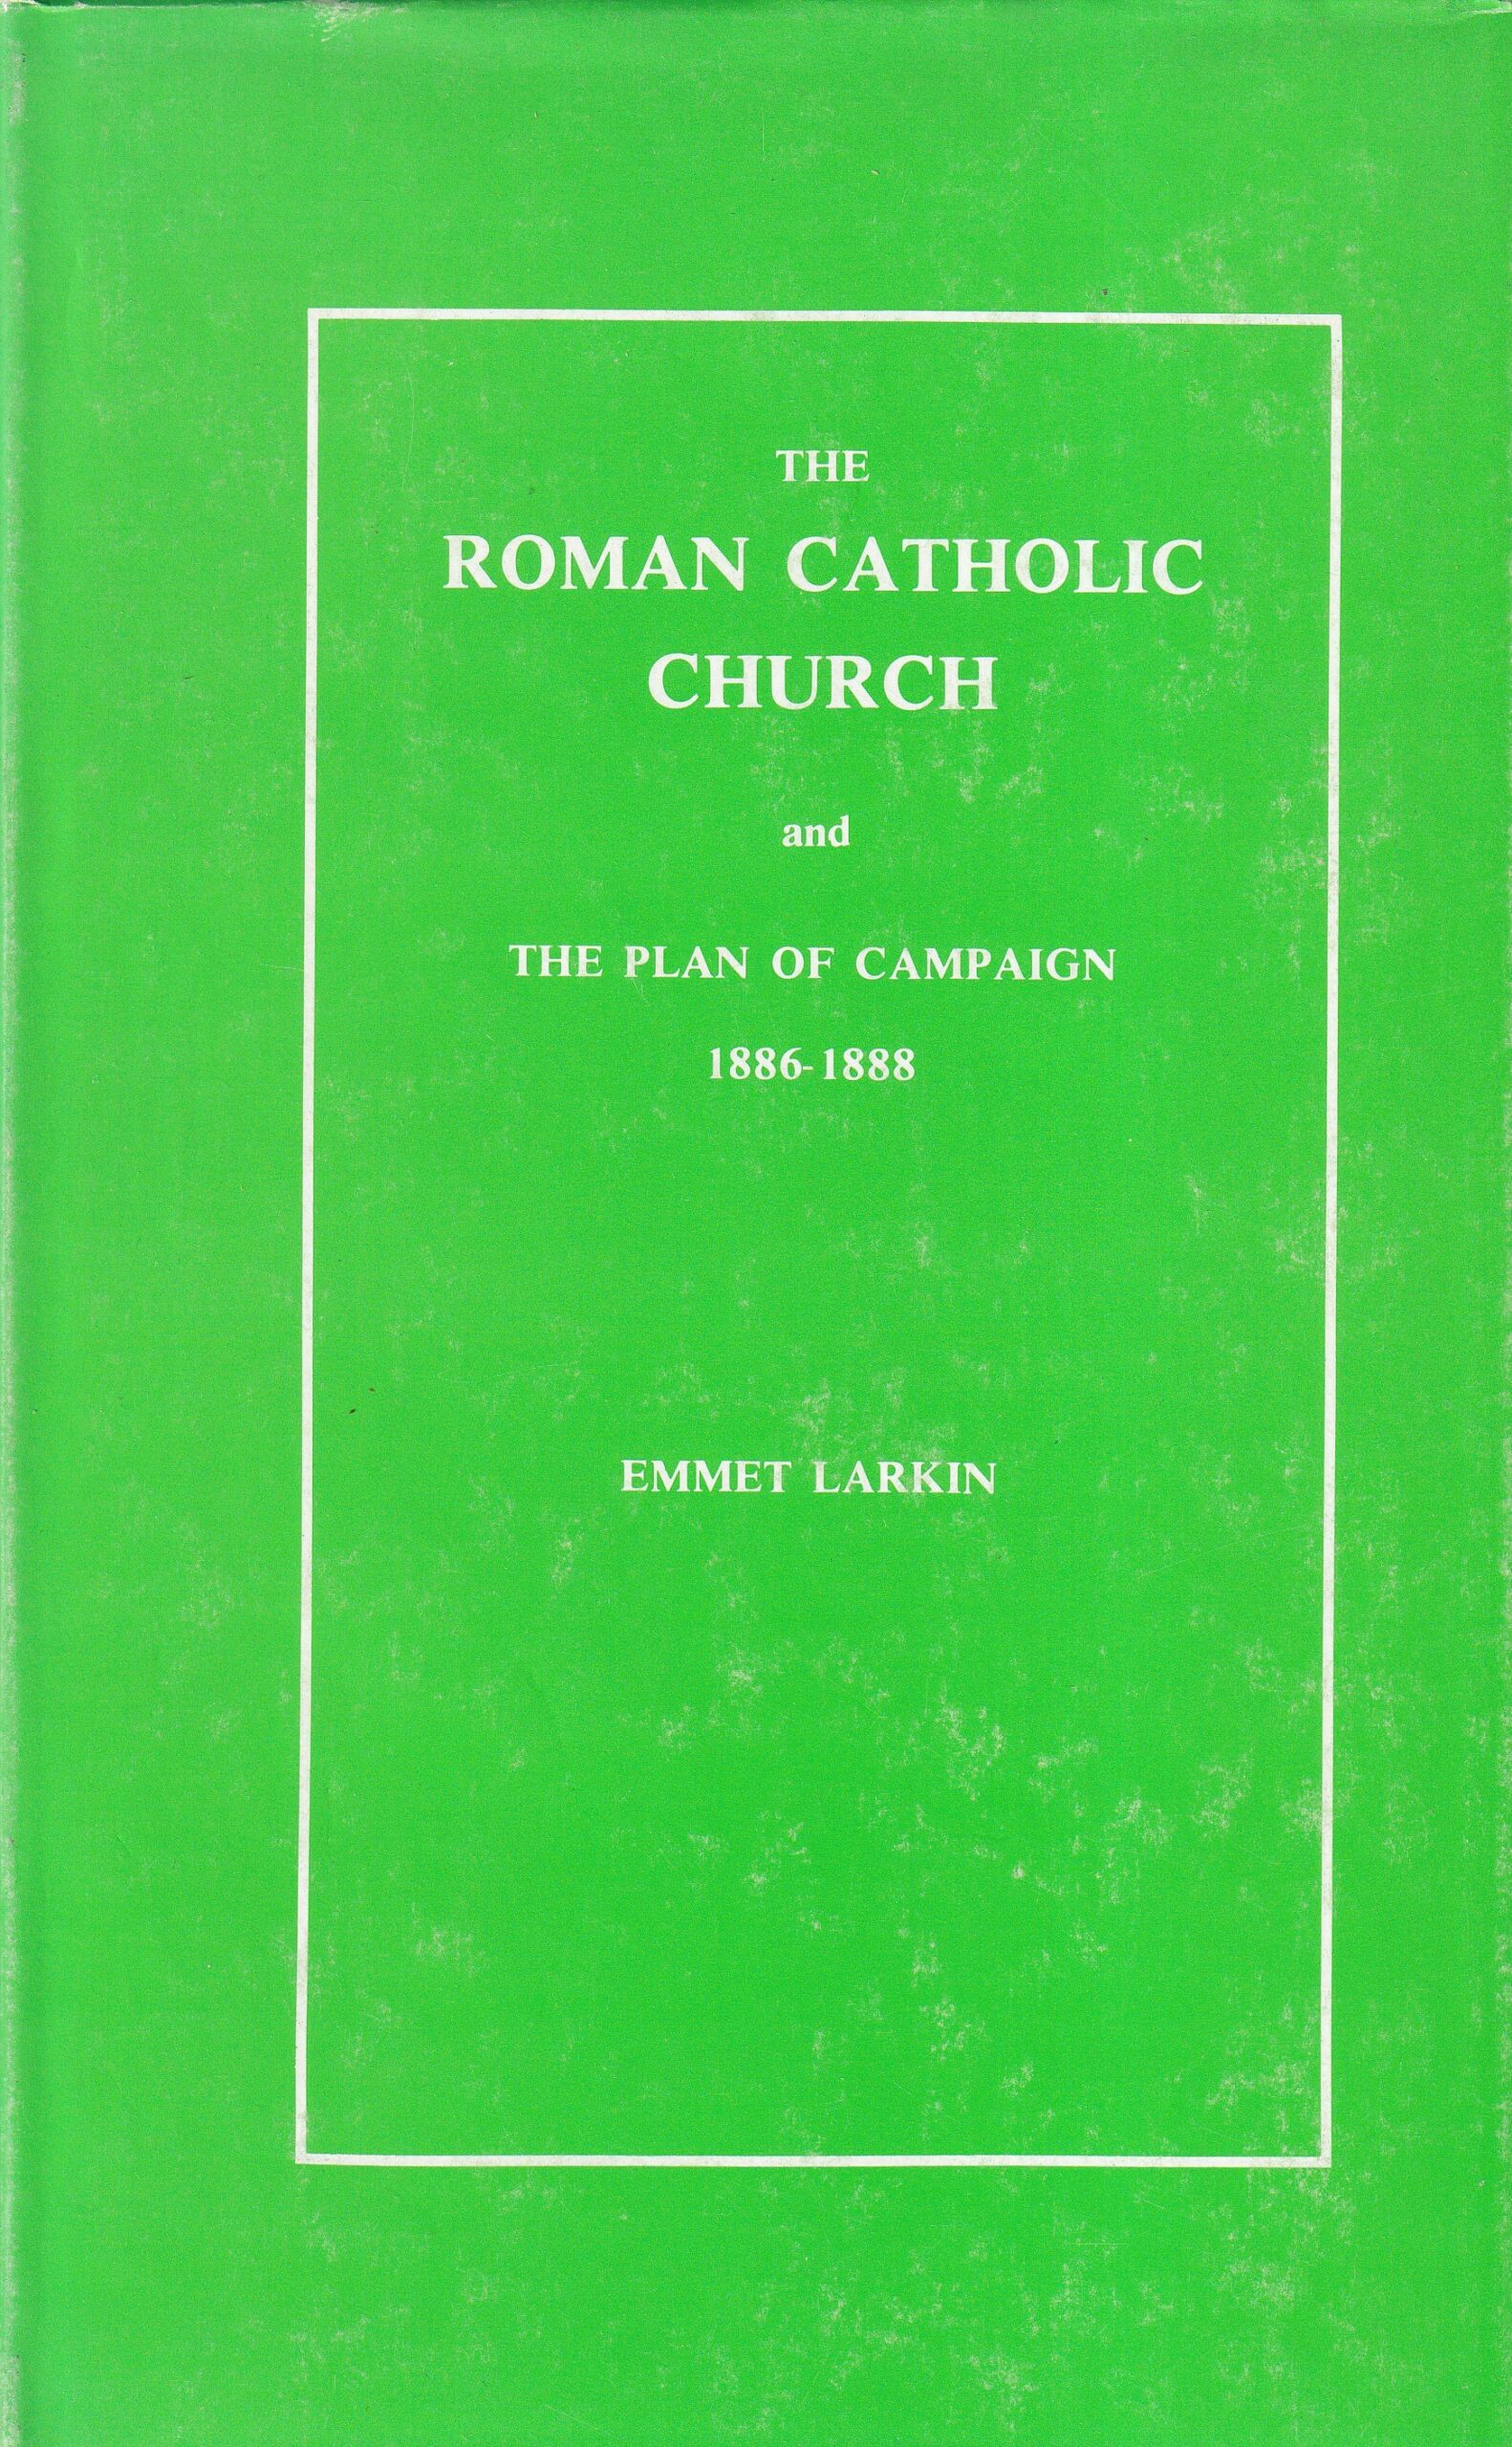 The Roman Catholic church and the plan of campaign in Ireland 1886-1888 | Emmet Larkin | Charlie Byrne's